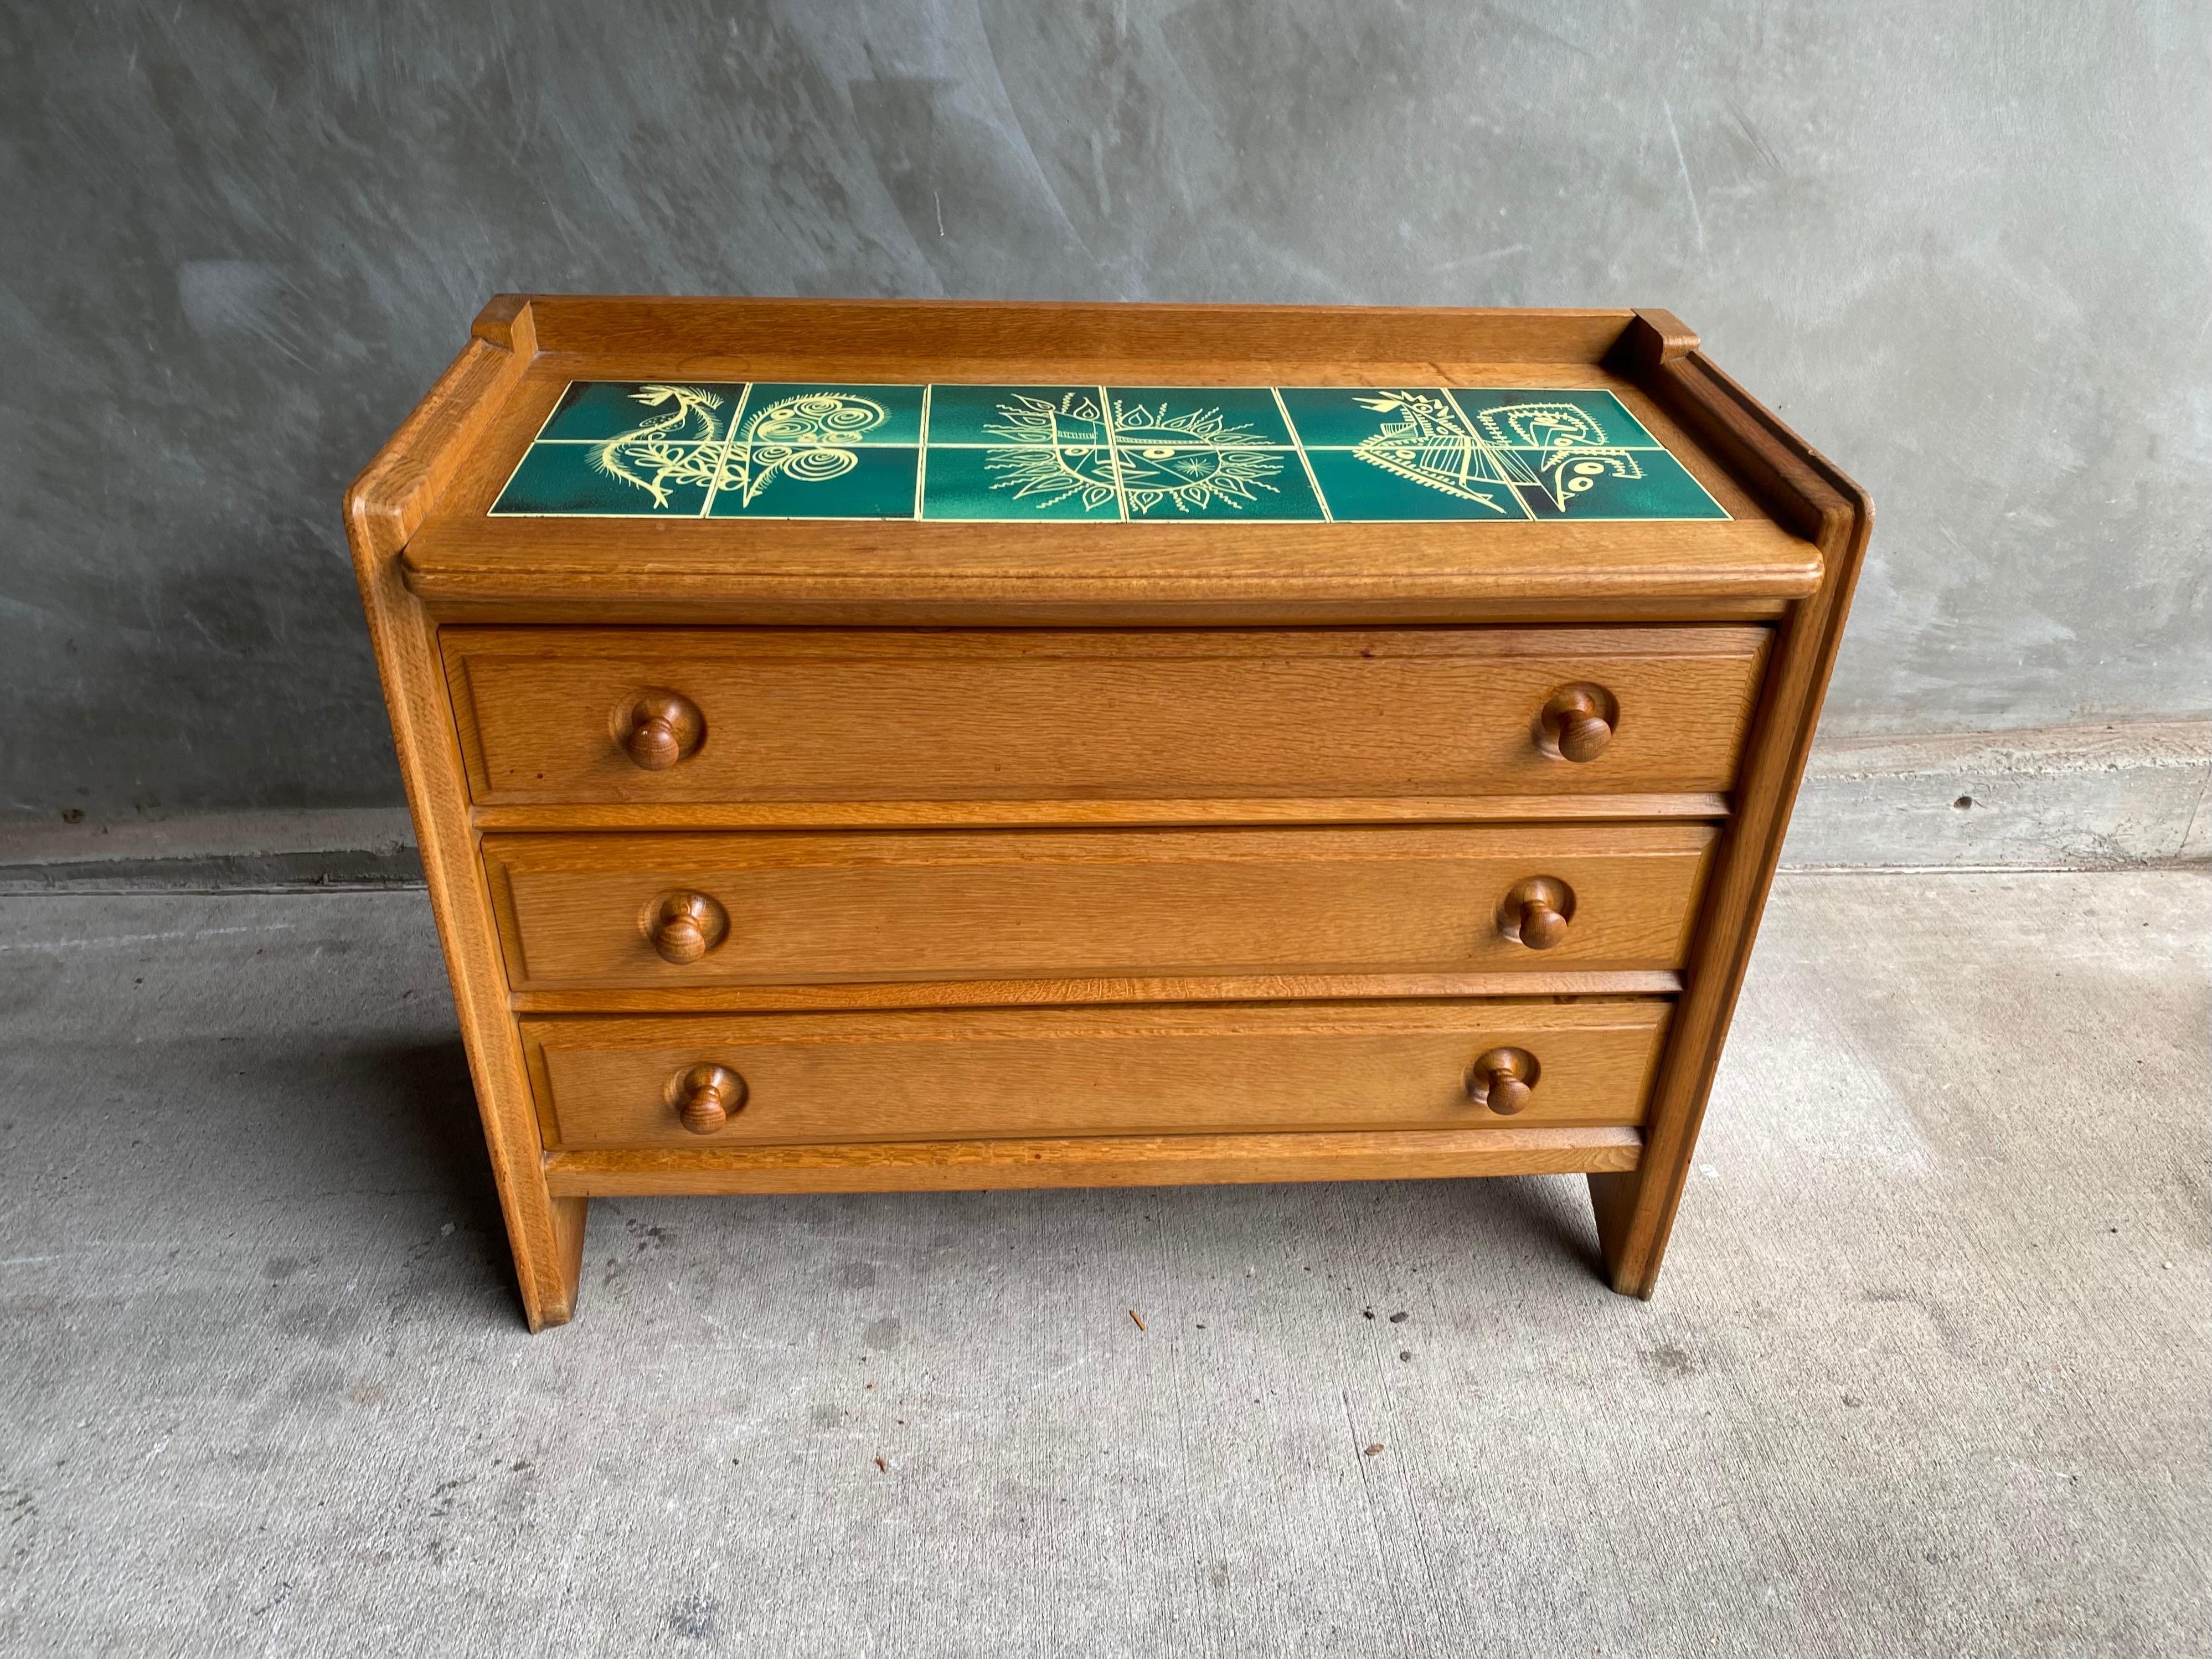 Chest of drawers by collectible design duo, Guillerme & Chambron, in French oak and from their studio, Votre Maison. Decorative green ceramic tile top by their friend and frequent collaborator, Boleslaw Danikowski. France, 1950's.